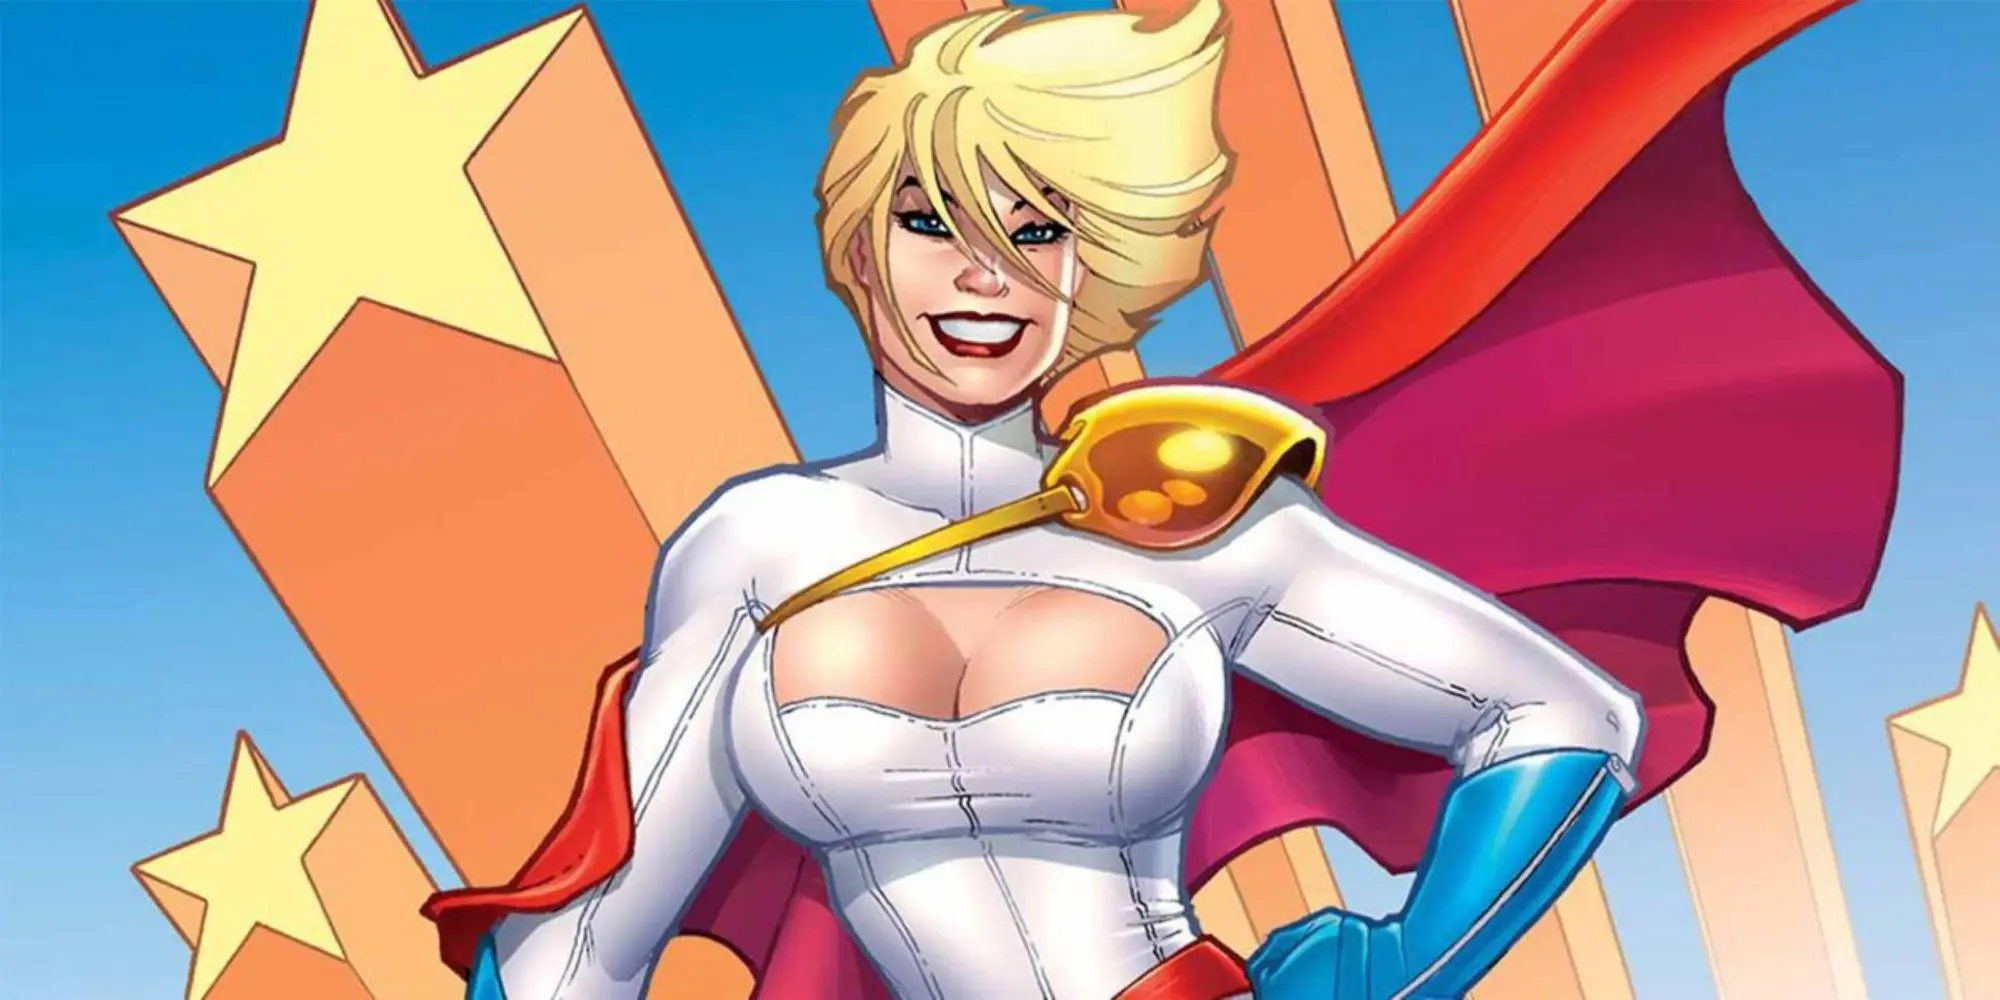 Strongest female dc characters: Power girl